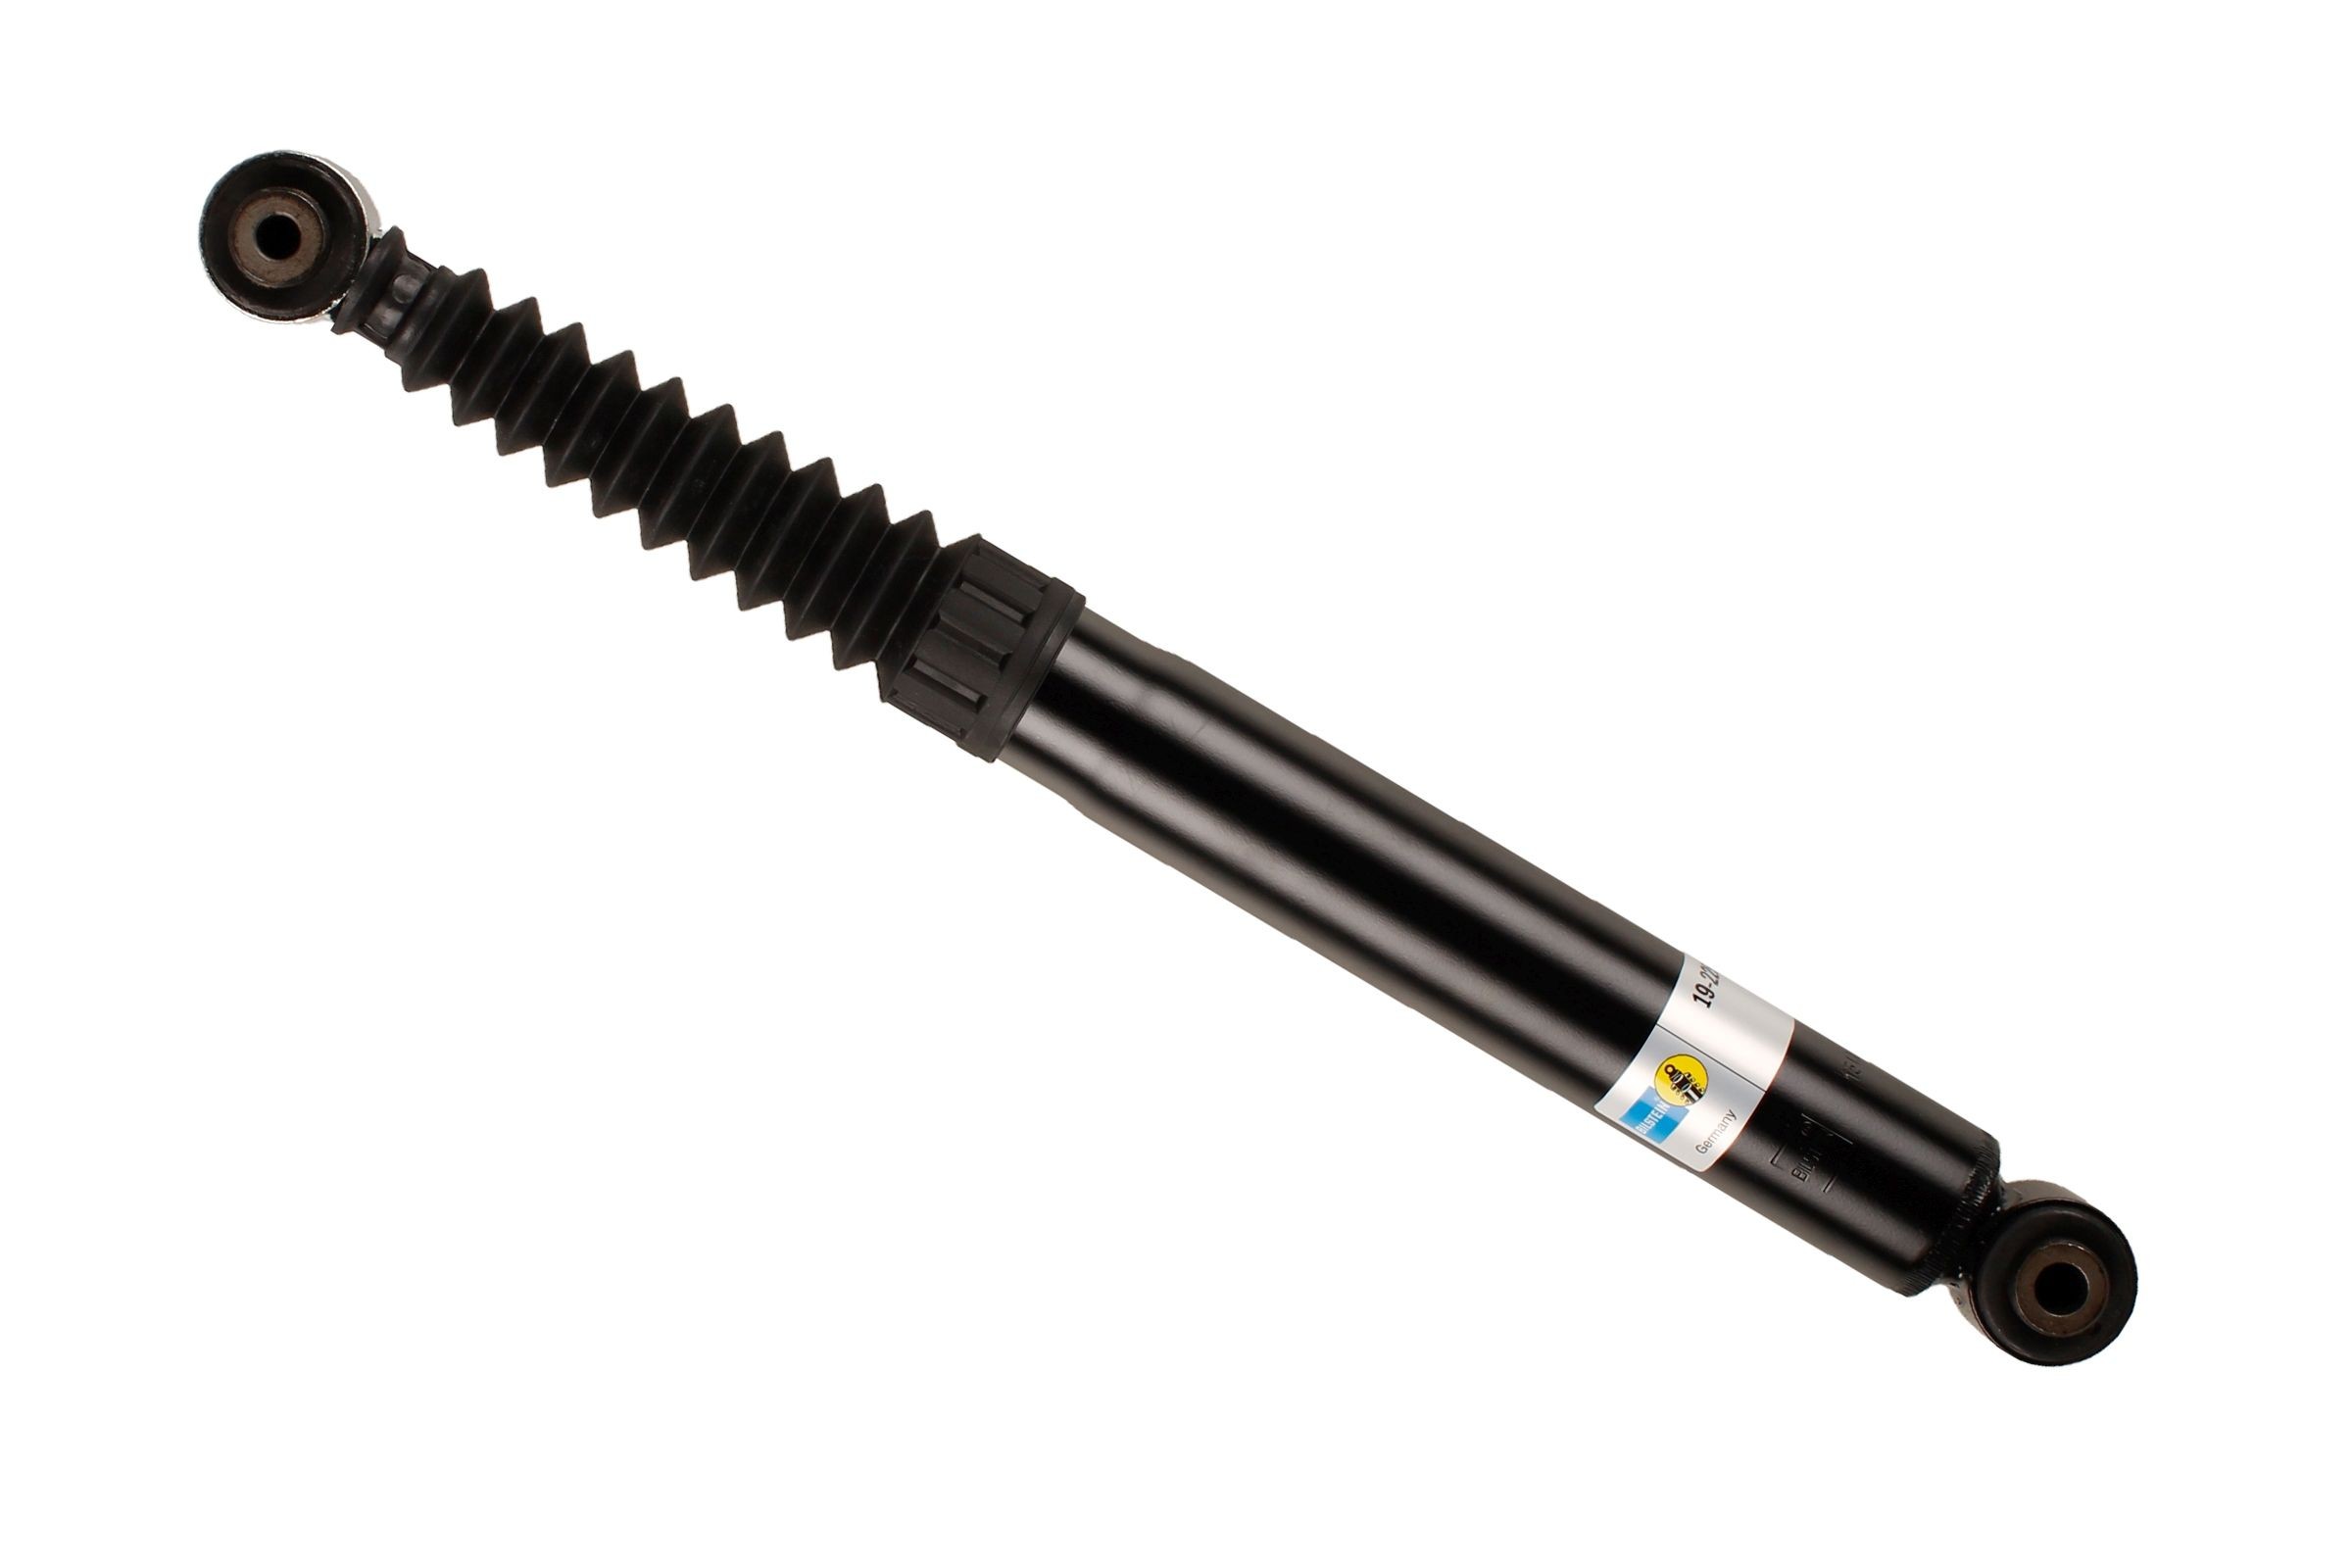 BILSTEIN - B4 OE Replacement 19-225234 Shock absorber Rear Axle, Gas Pressure, Twin-Tube, Absorber does not carry a spring, Top eye, Bottom eye